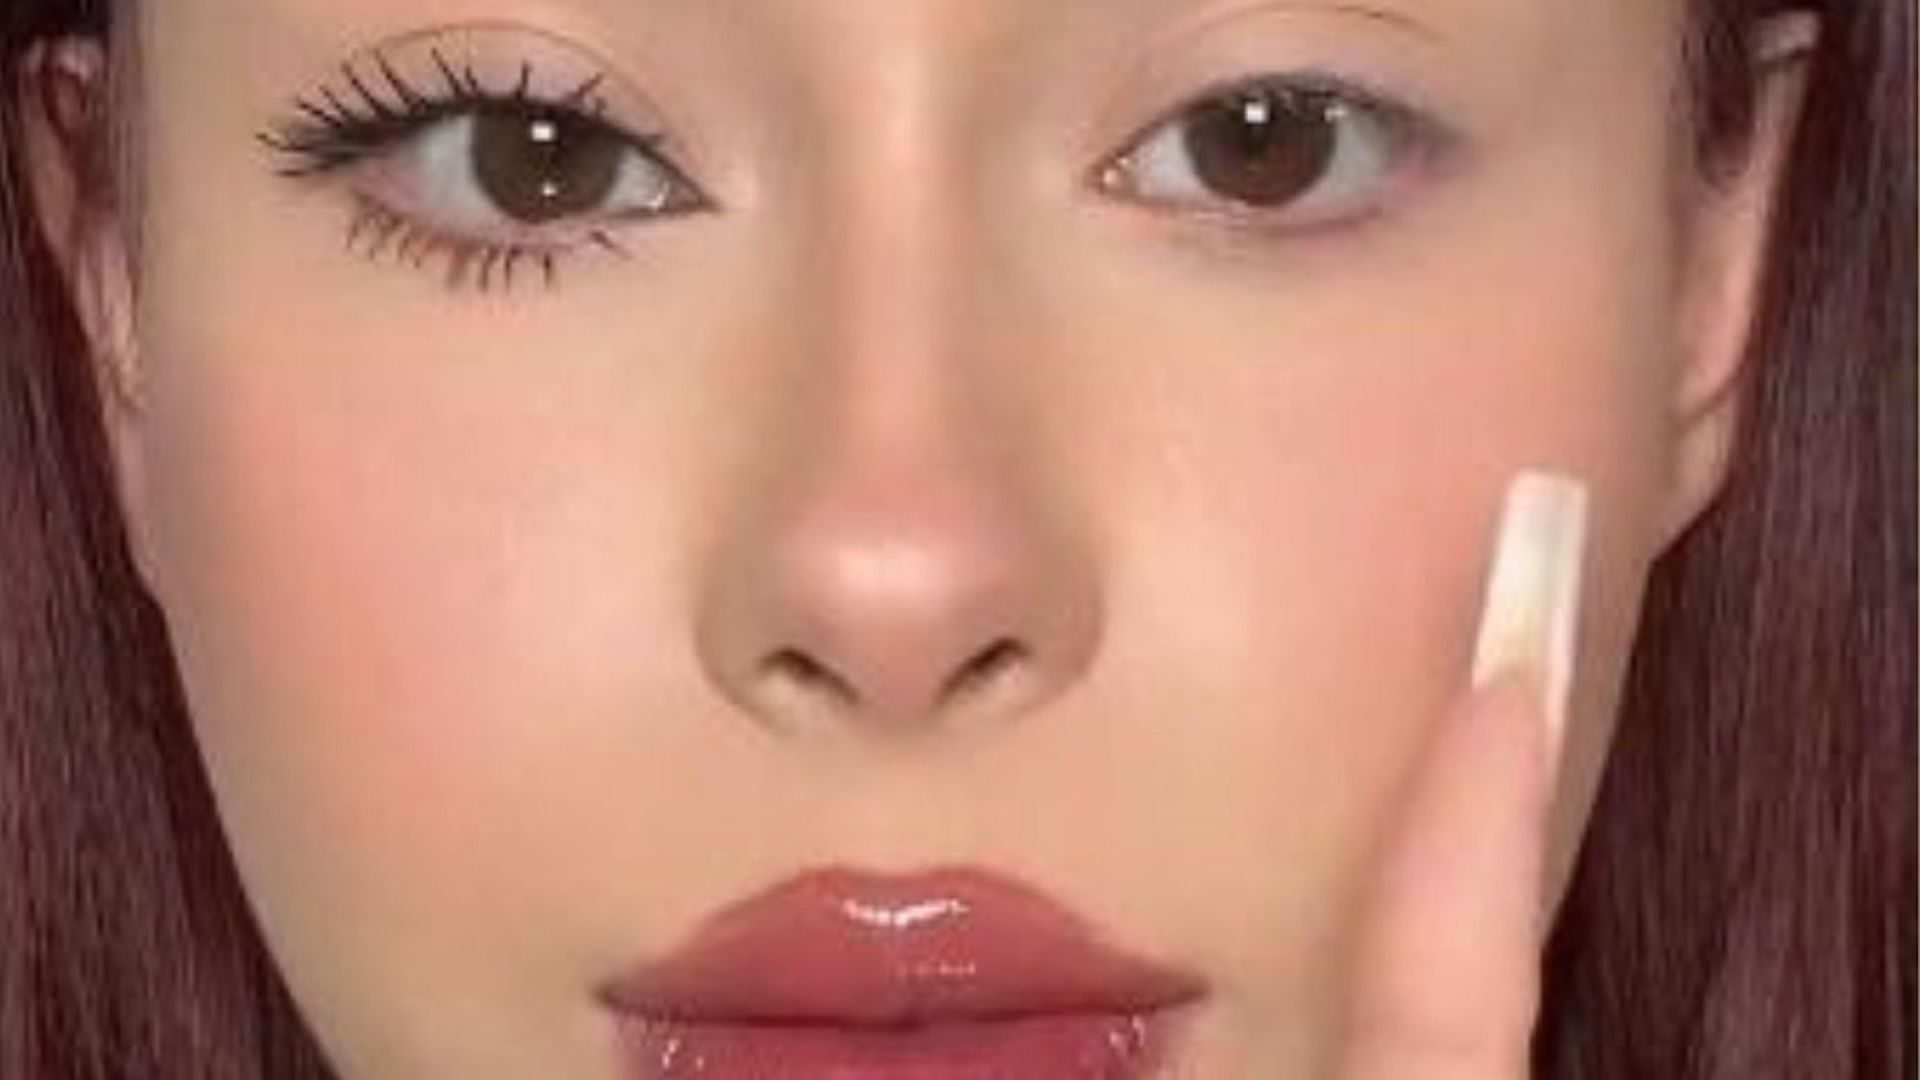 You’ve been doing your mascara wrong – how to make short, thin lashes look so much thicker in 2 easy steps